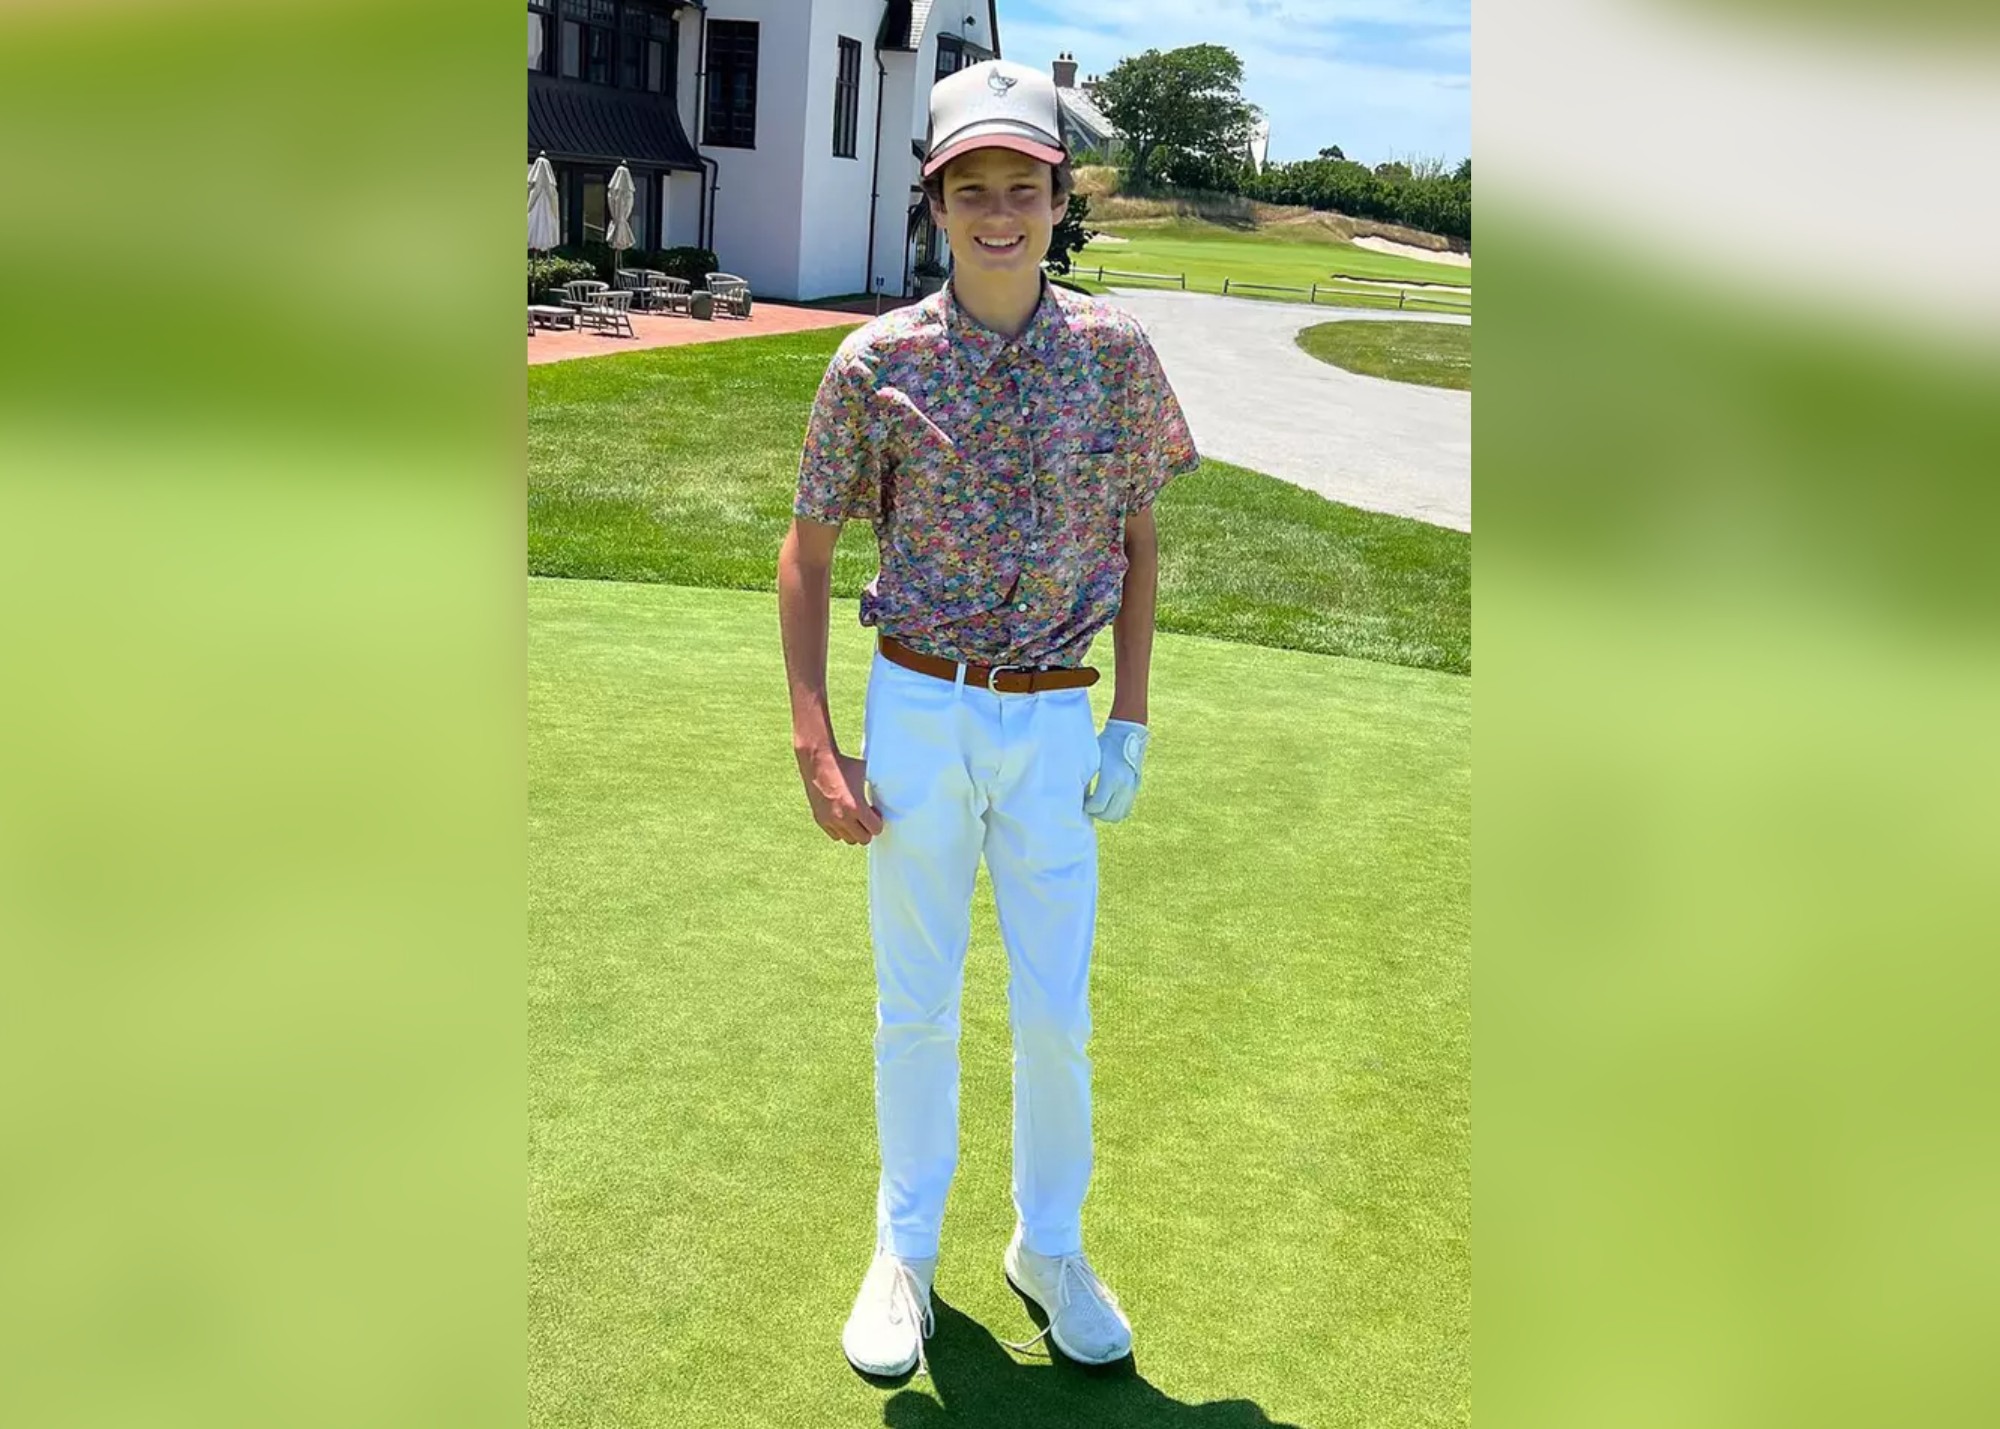 Jack Moynahan wears a floral polo shirt and white pants while standing in a green field